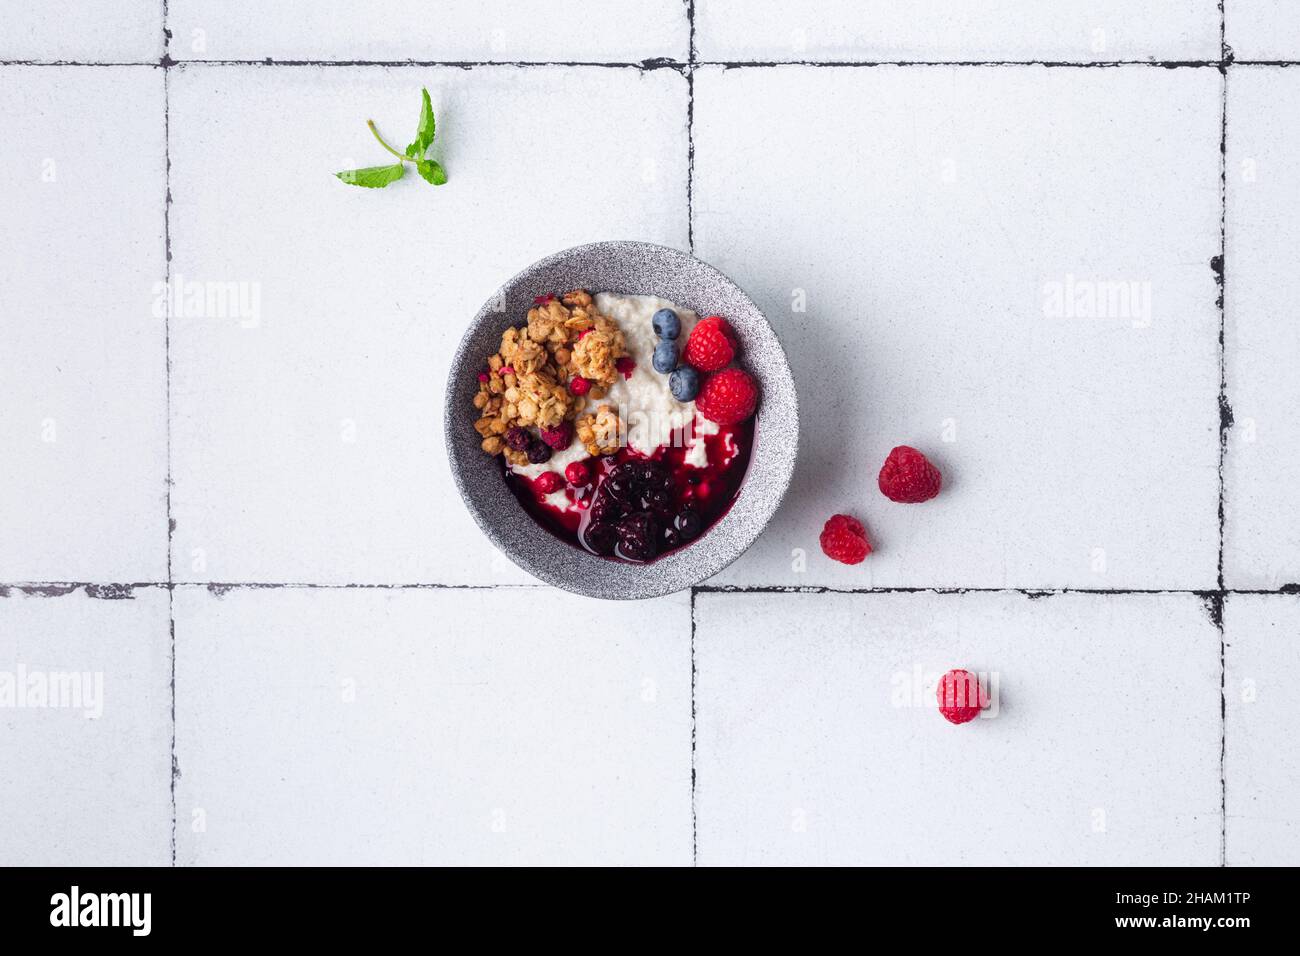 Healthy breakfast cereal porridge with berries and jam in bowl. Closeup view. Stock Photo